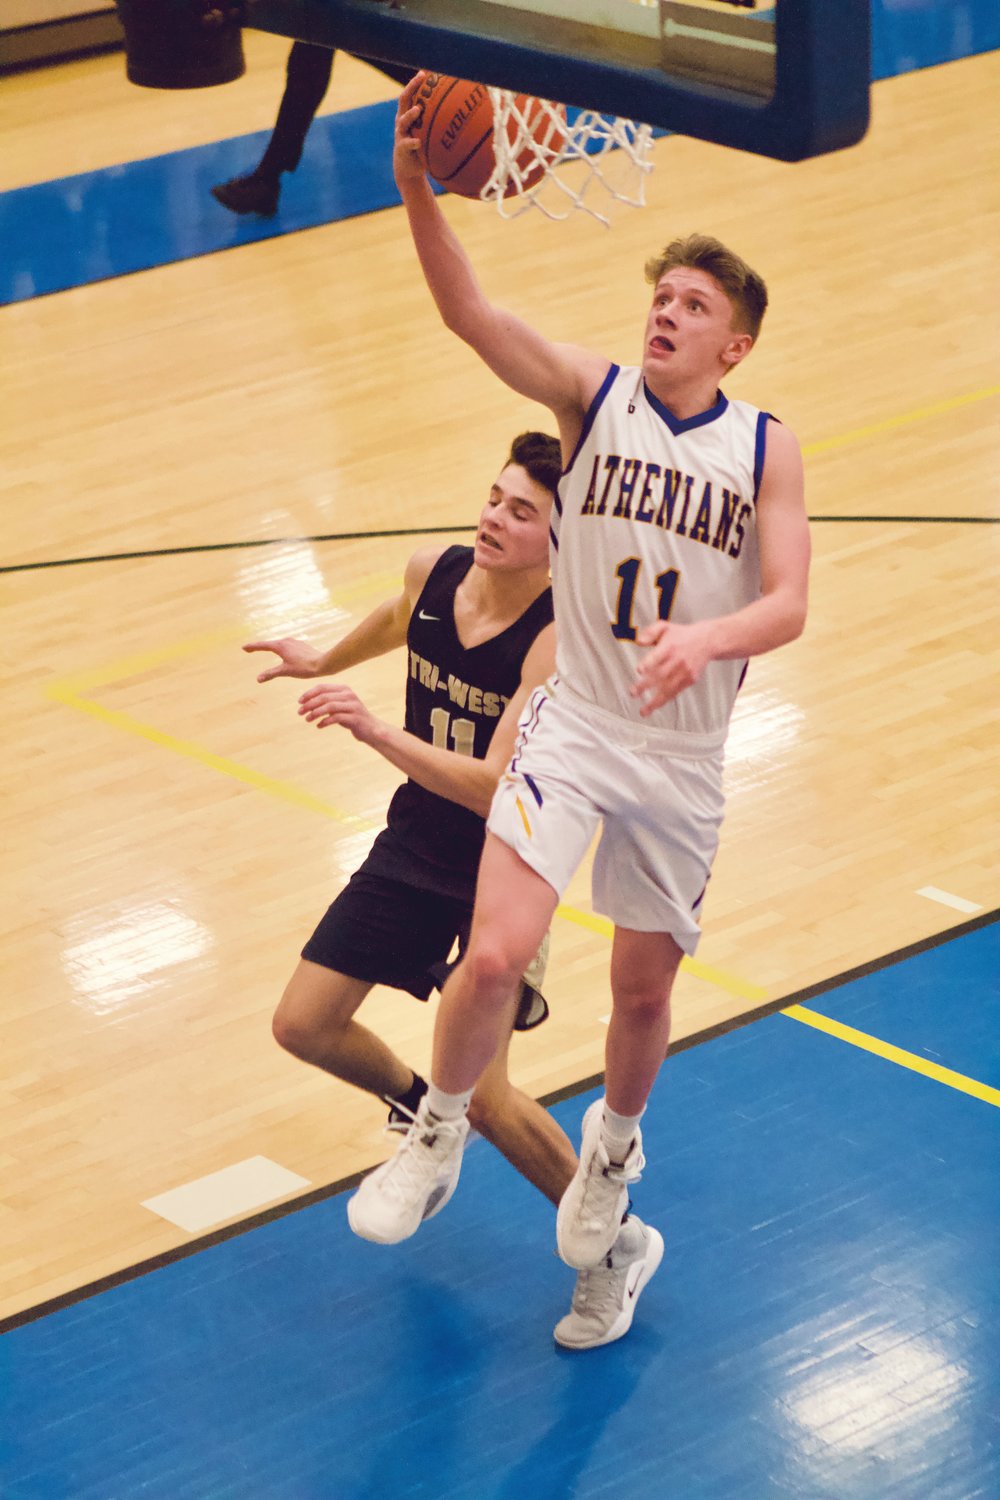 Karsten Williamson led the Athenians with 20 points in their 65-51 win over Tri-West in a game last season.